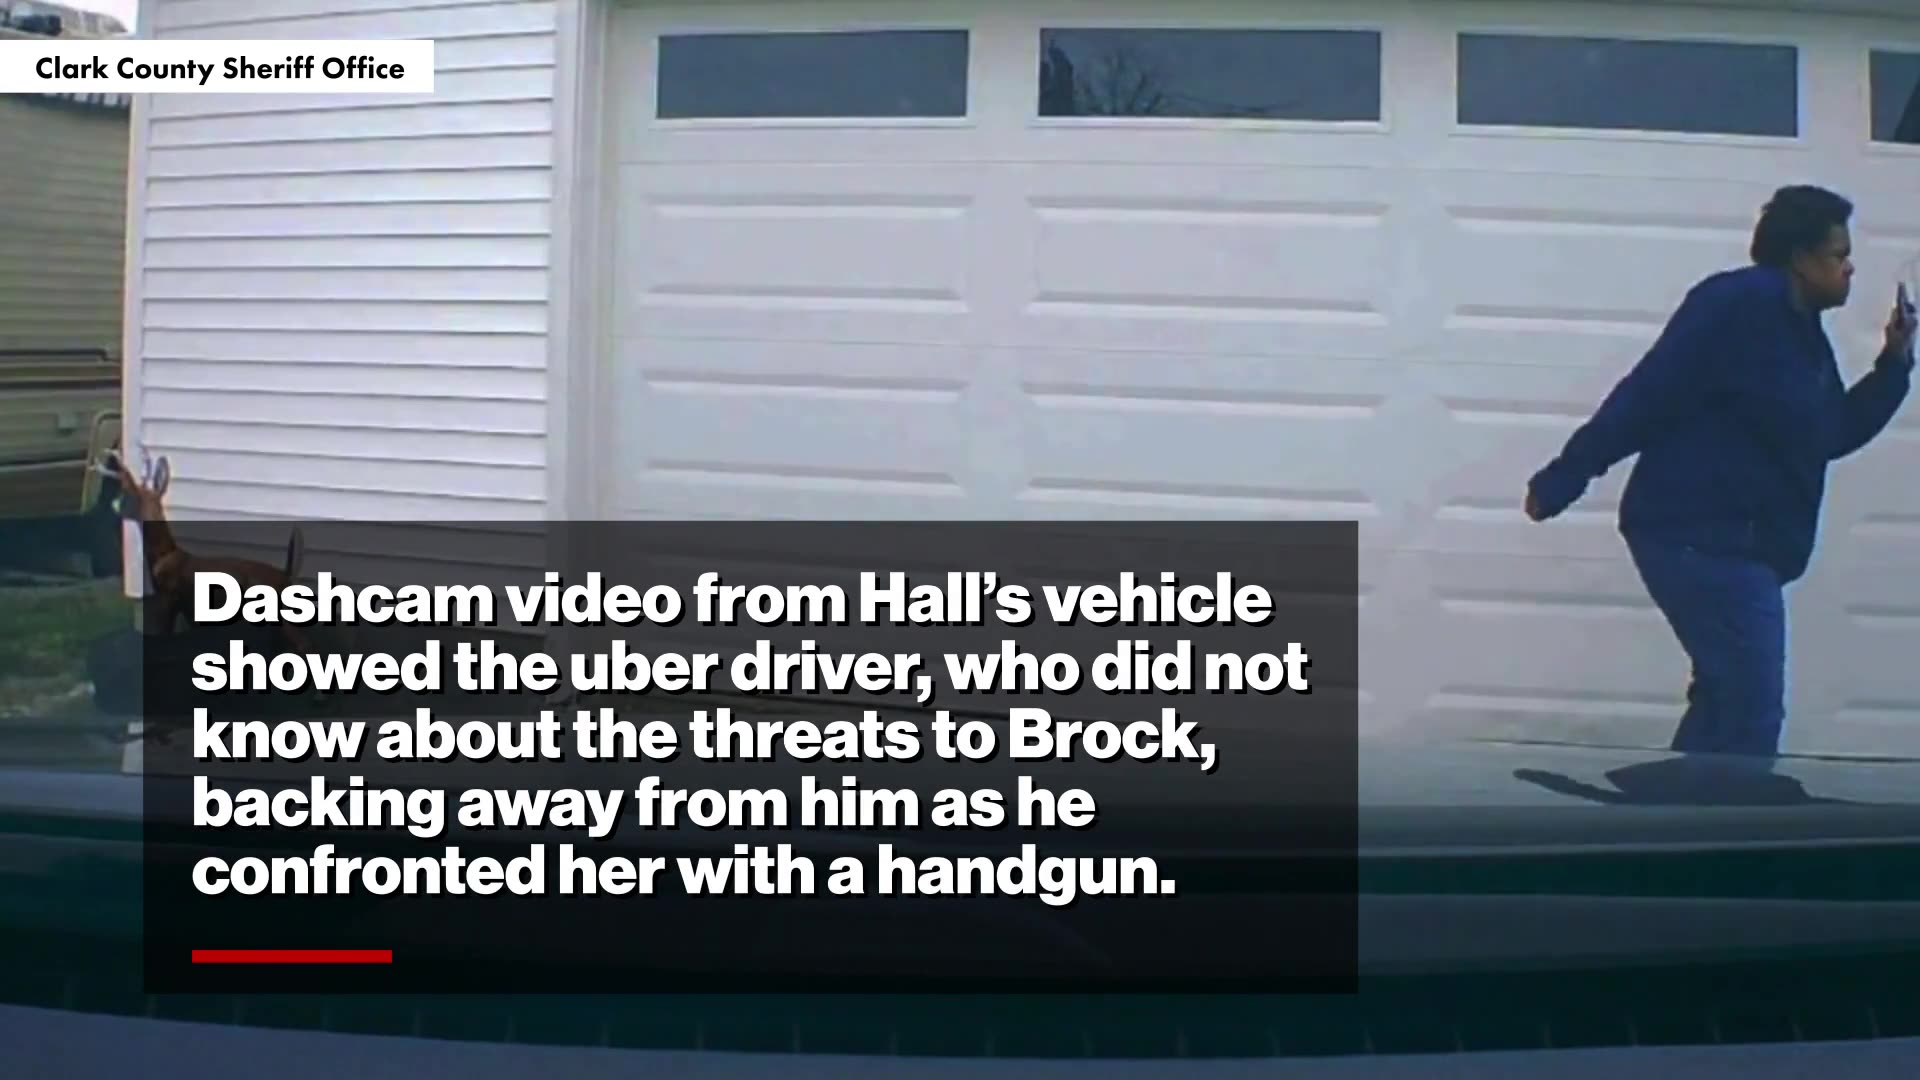 'I'm sure glad you guys are here': Moment scam victim greets cops after allegedly shooting innocent Uber driver